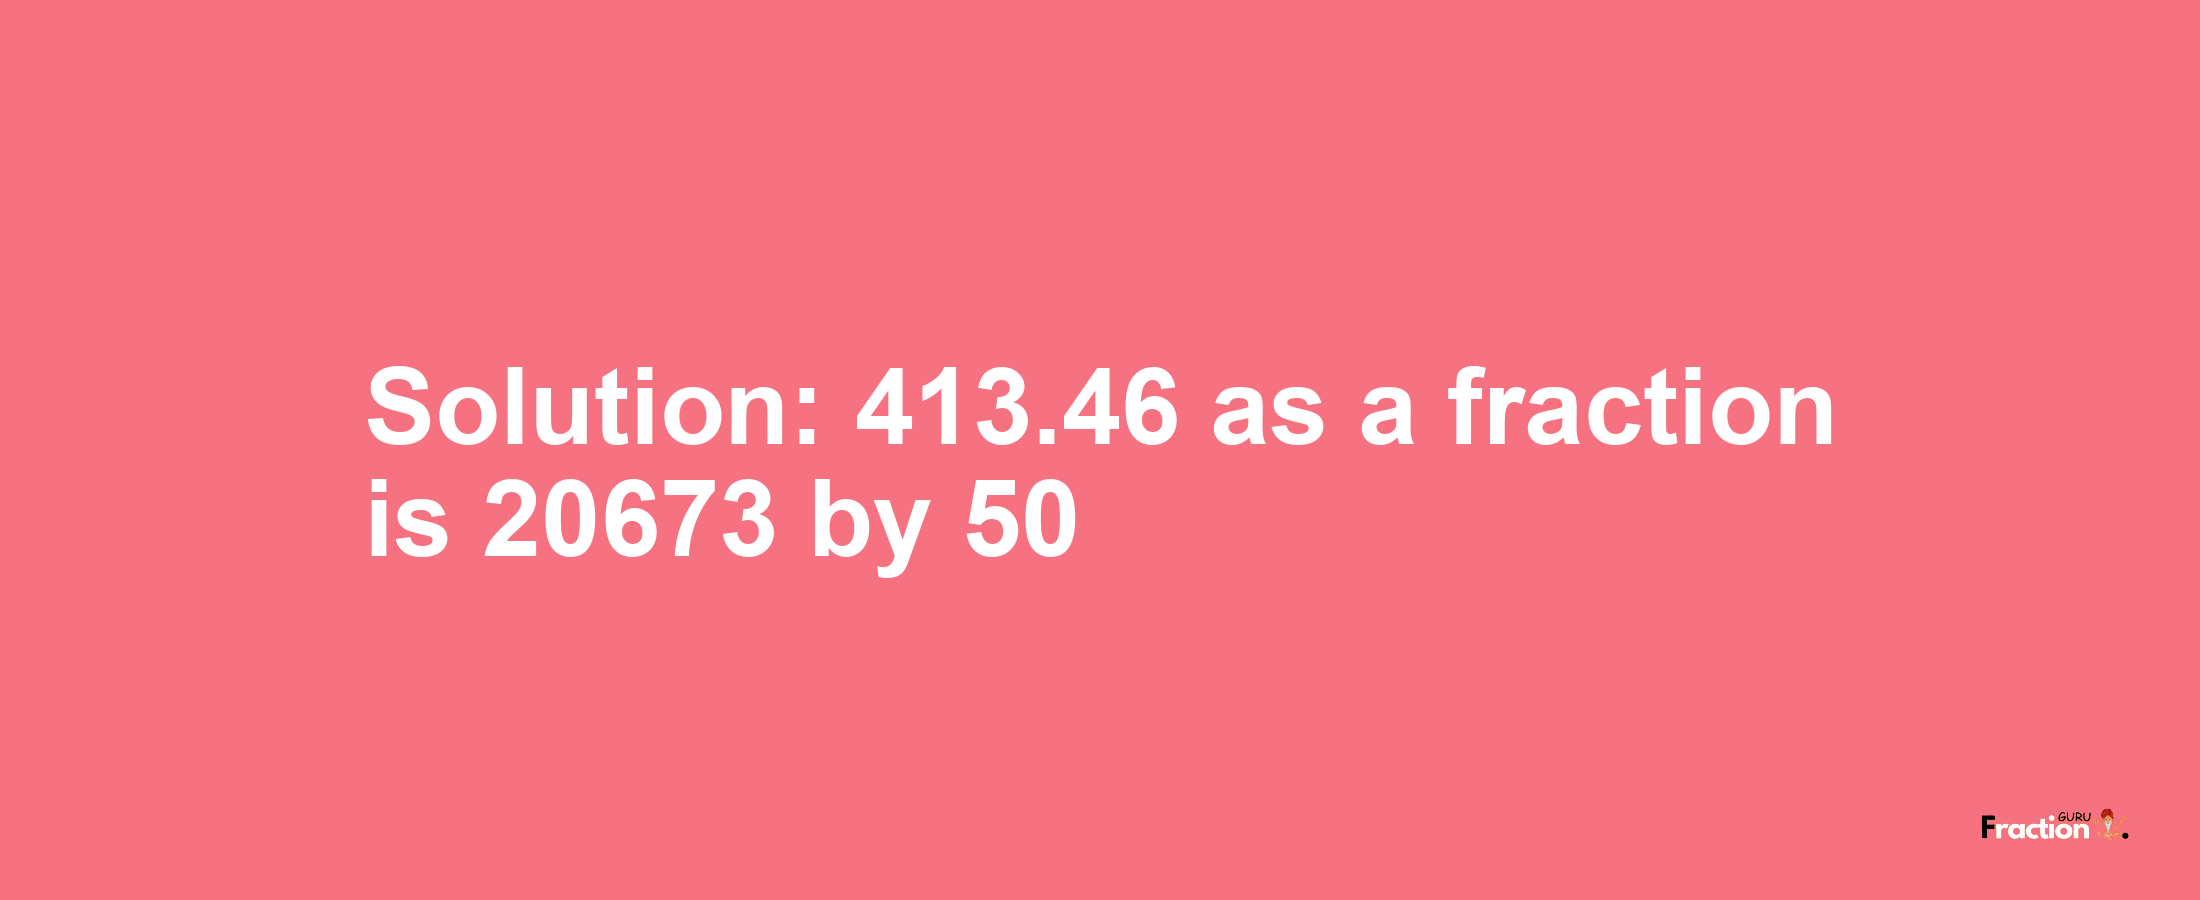 Solution:413.46 as a fraction is 20673/50